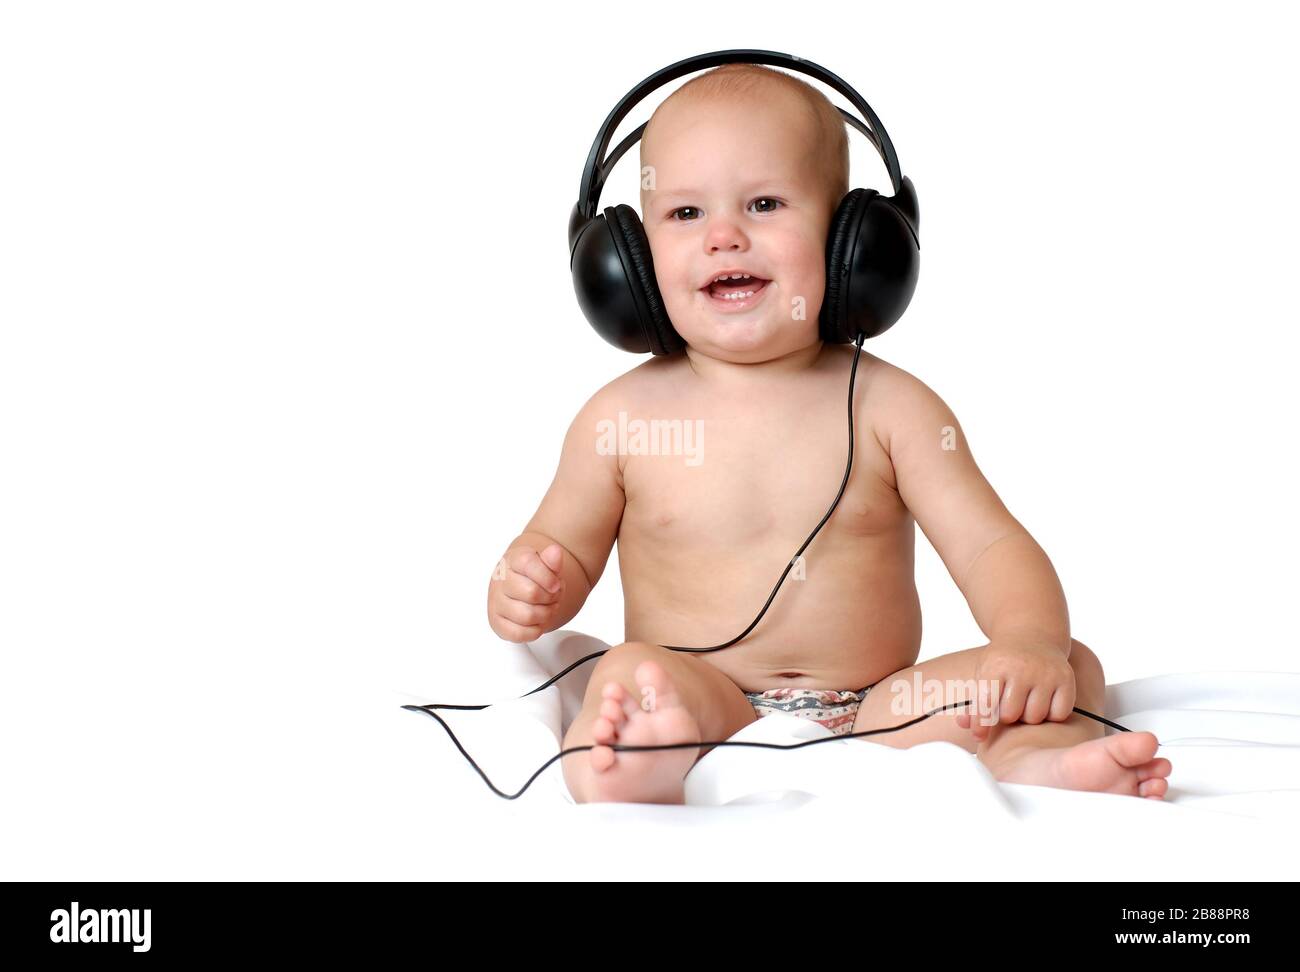 Little one year old boy listens to music in big headphones and smiles on an isolated white background Stock Photo